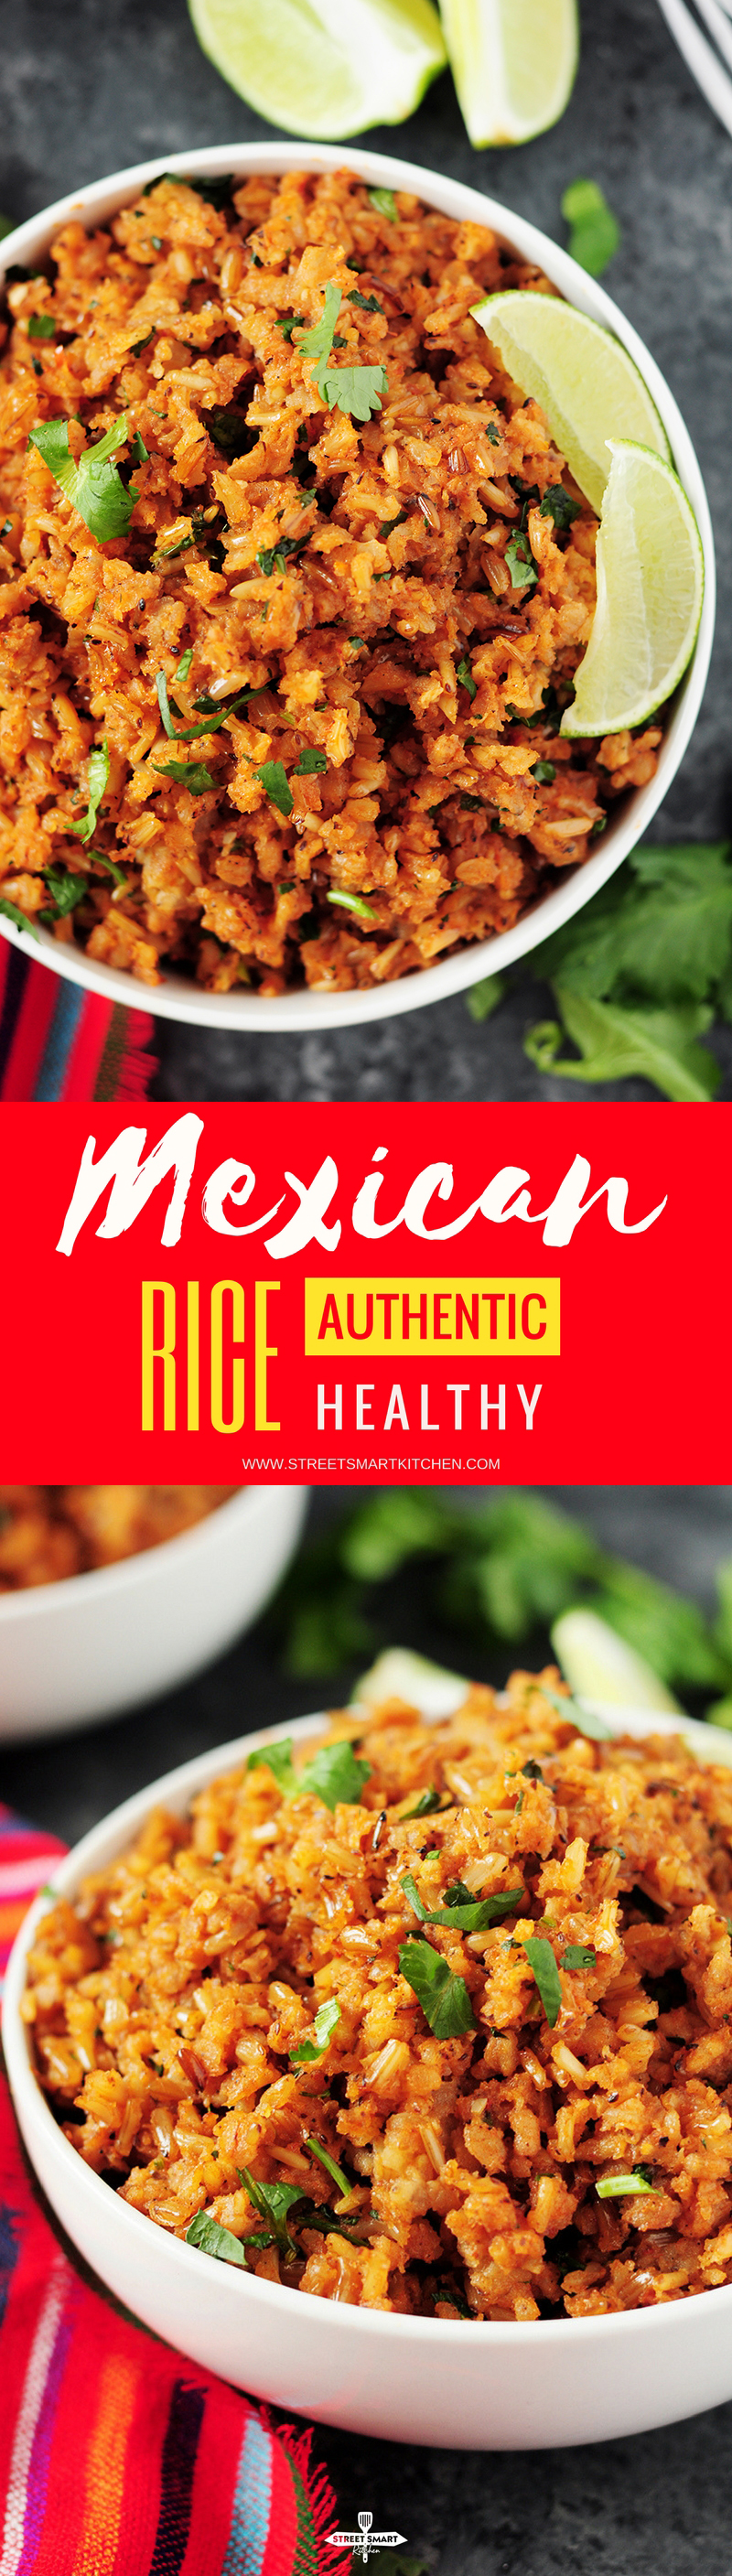 Easy Mexican rice recipe made authentic, healthy, and addictive, plus a step-by-step guide on how to make the best Mexican rice every single time.